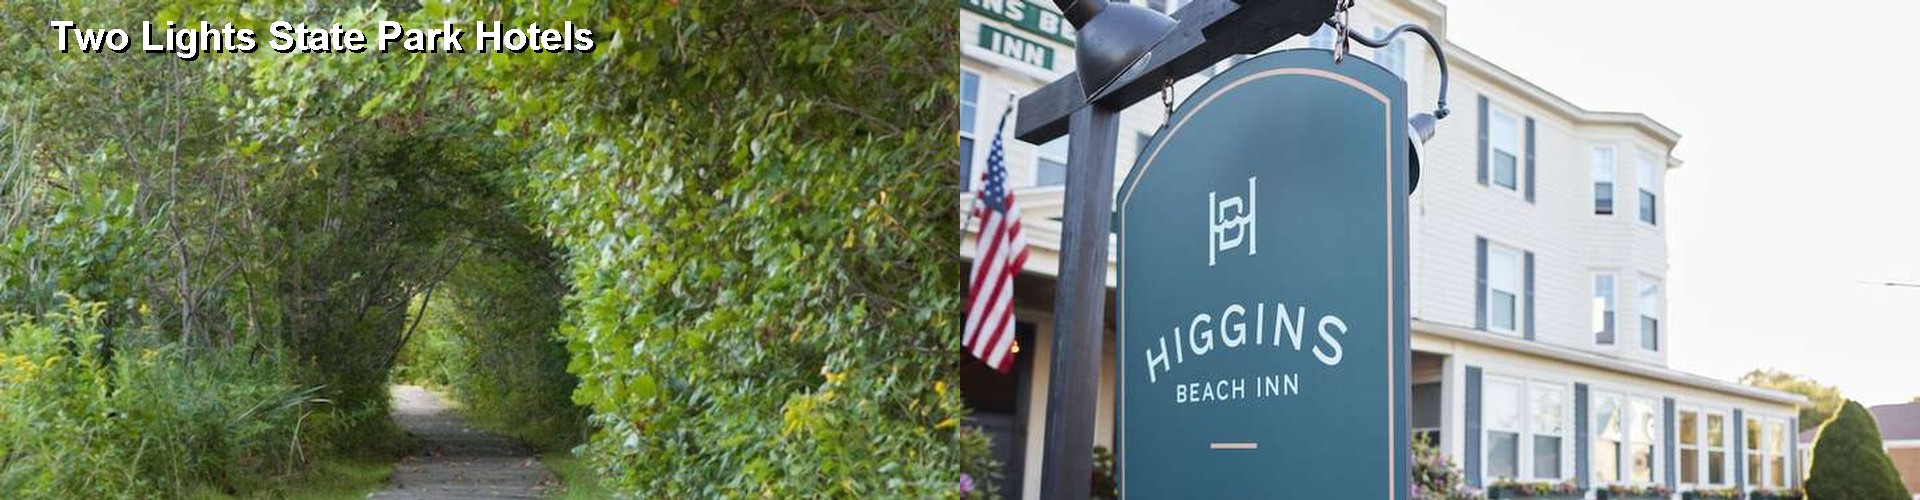 5 Best Hotels near Two Lights State Park